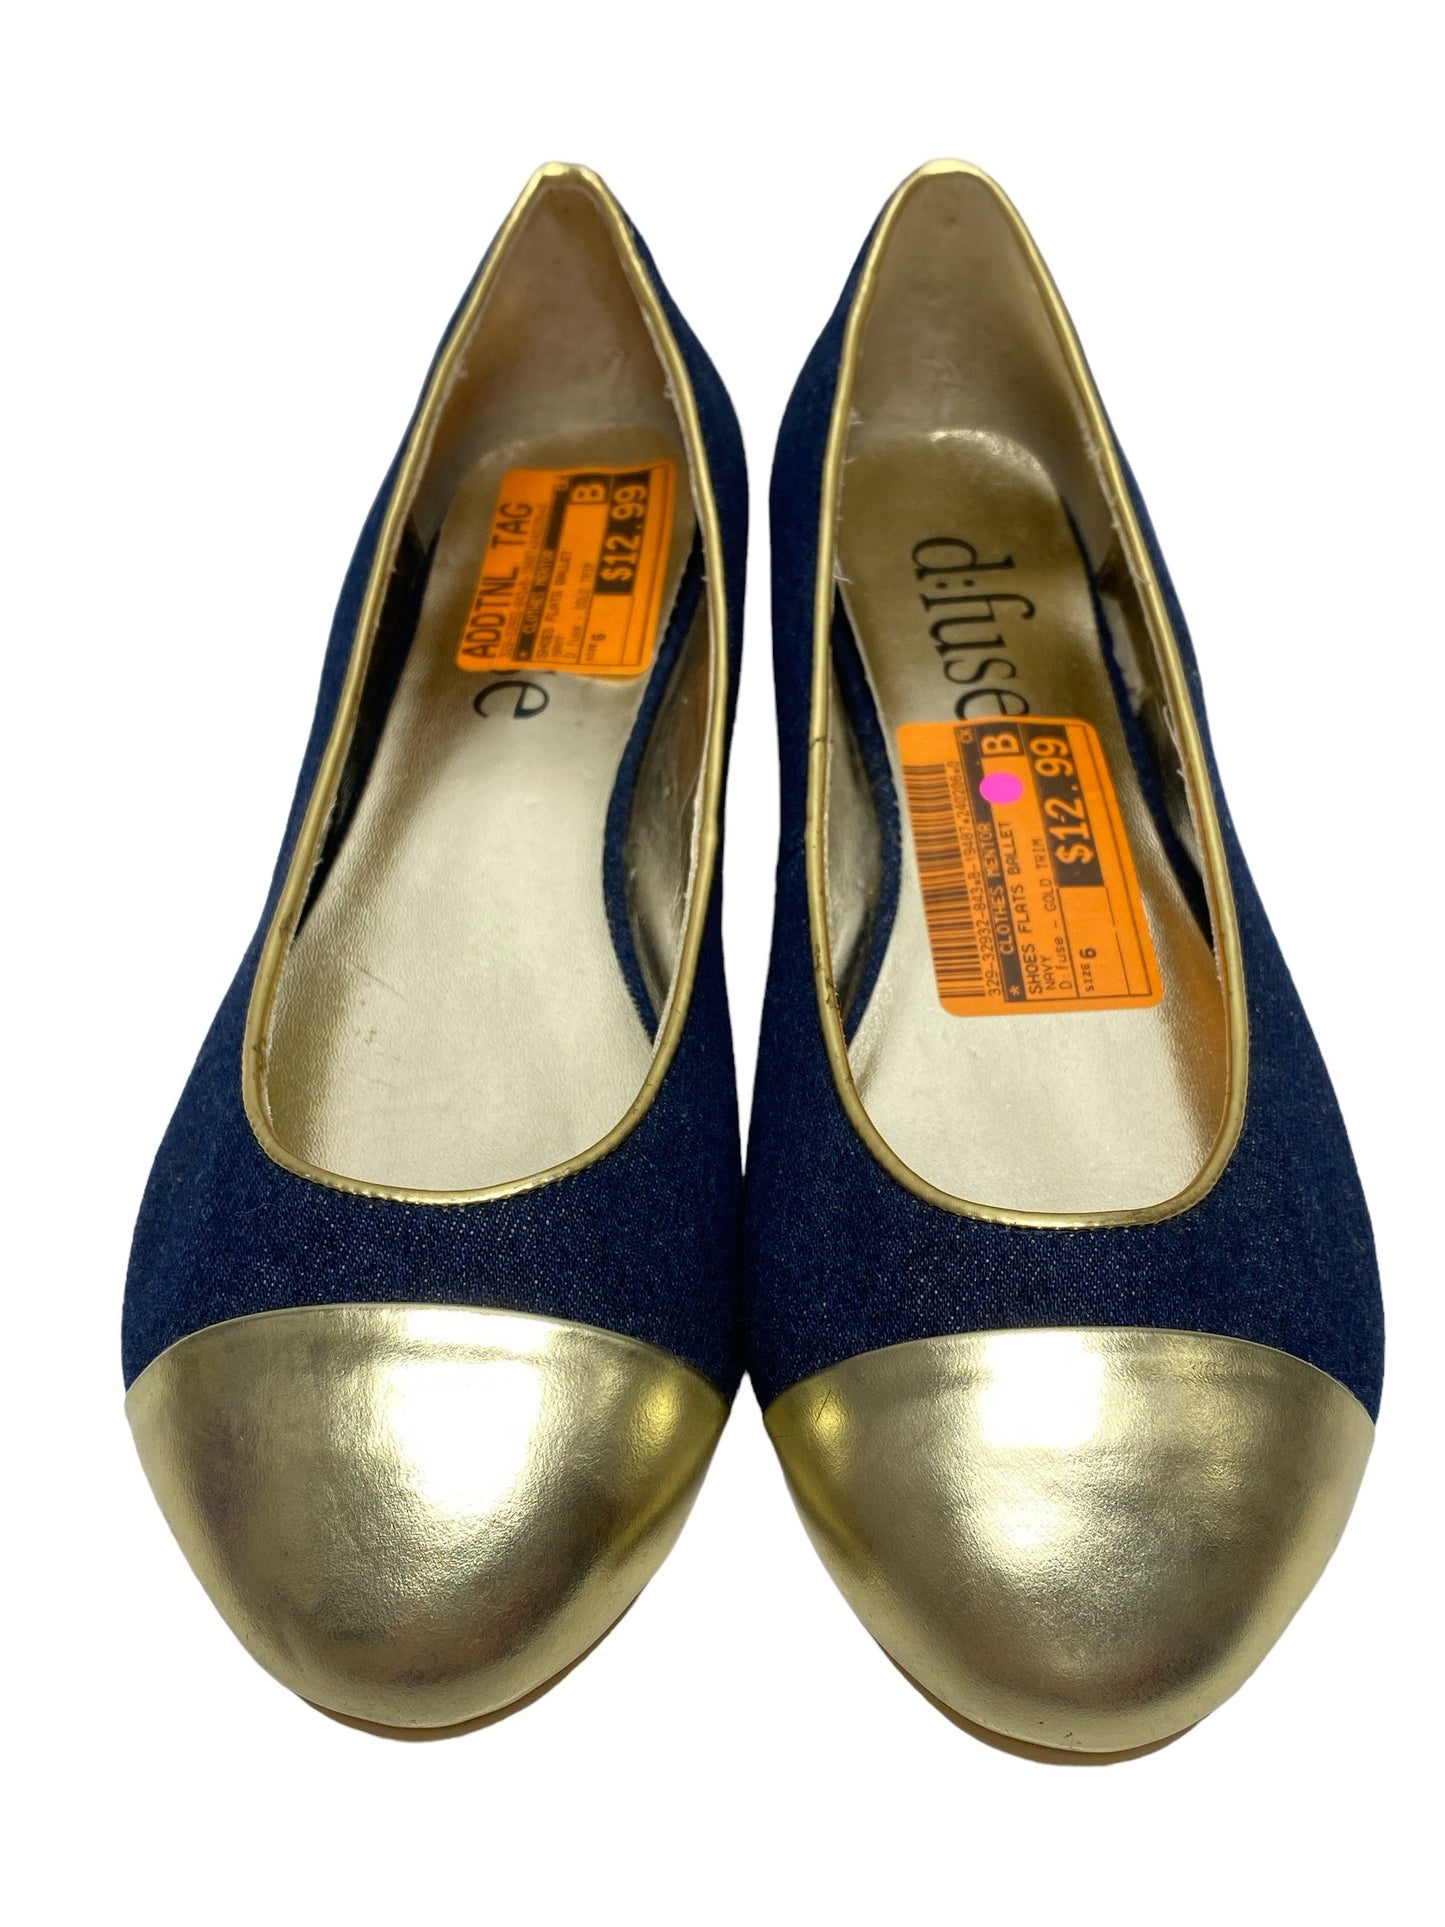 Shoes Flats Ballet By Clothes Mentor  Size: 6